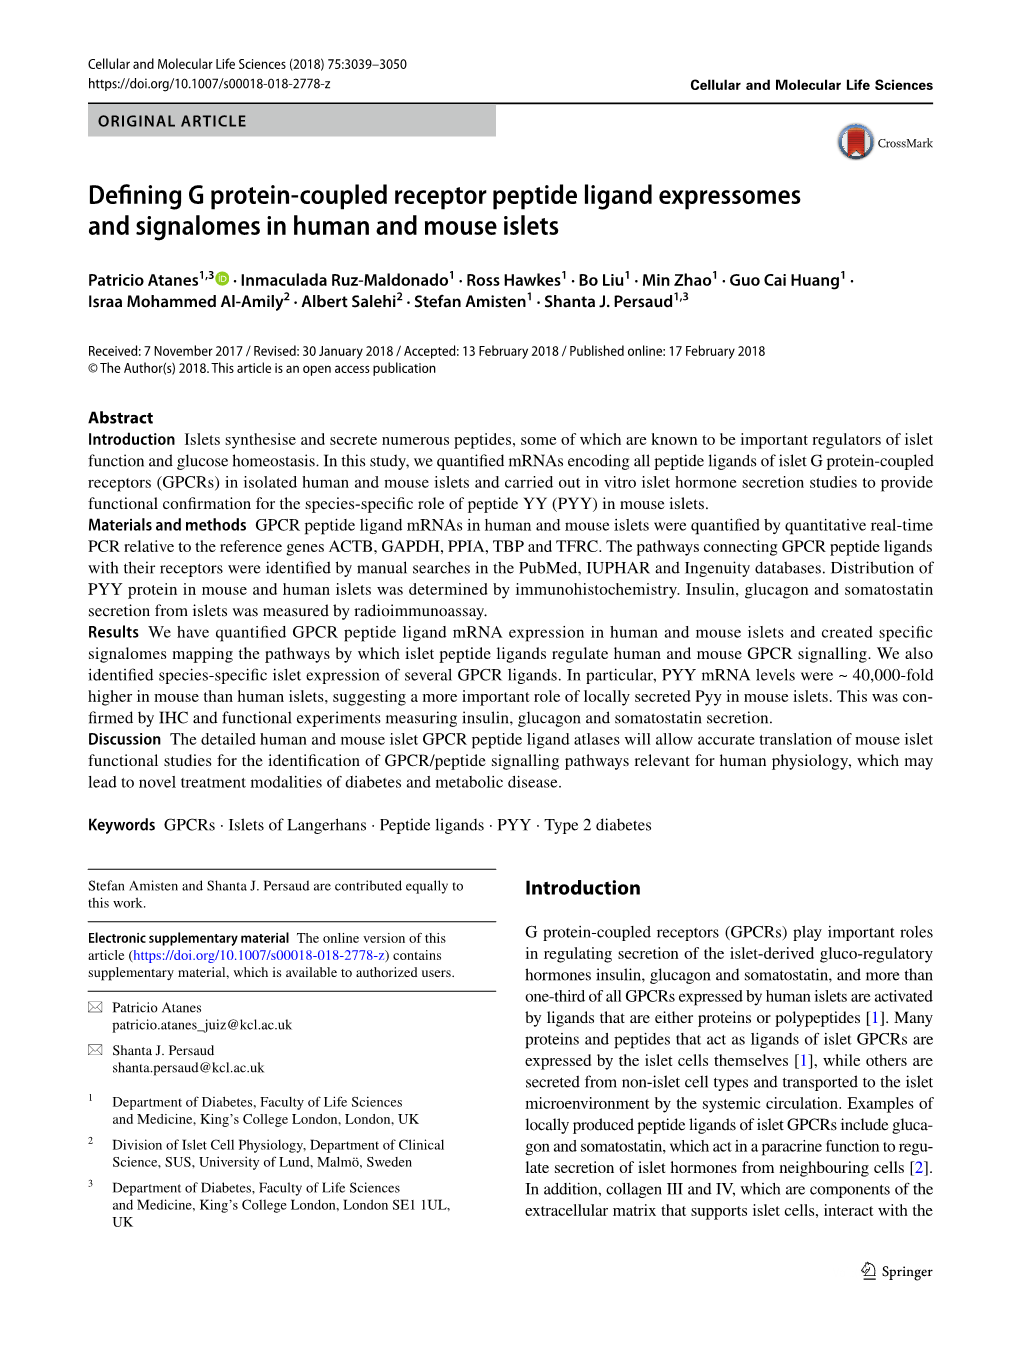 Defining G Protein-Coupled Receptor Peptide Ligand Expressomes and Signalomes in Human and Mouse Islets